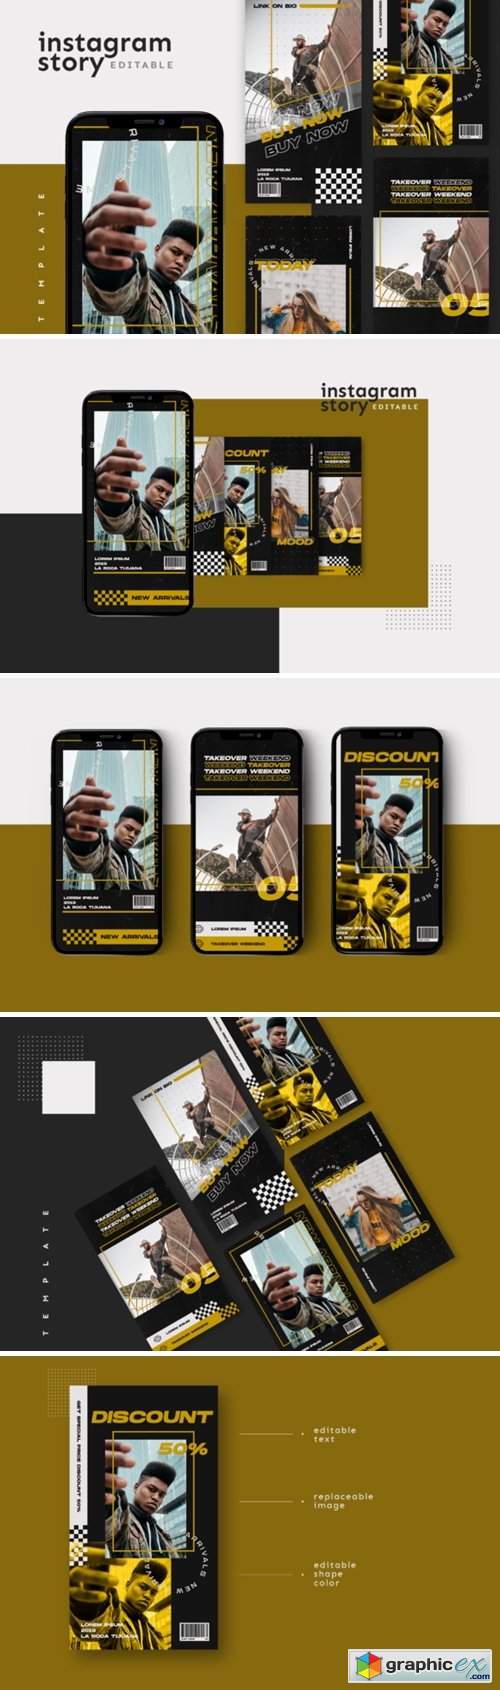  Instagram Story Template 3019187 